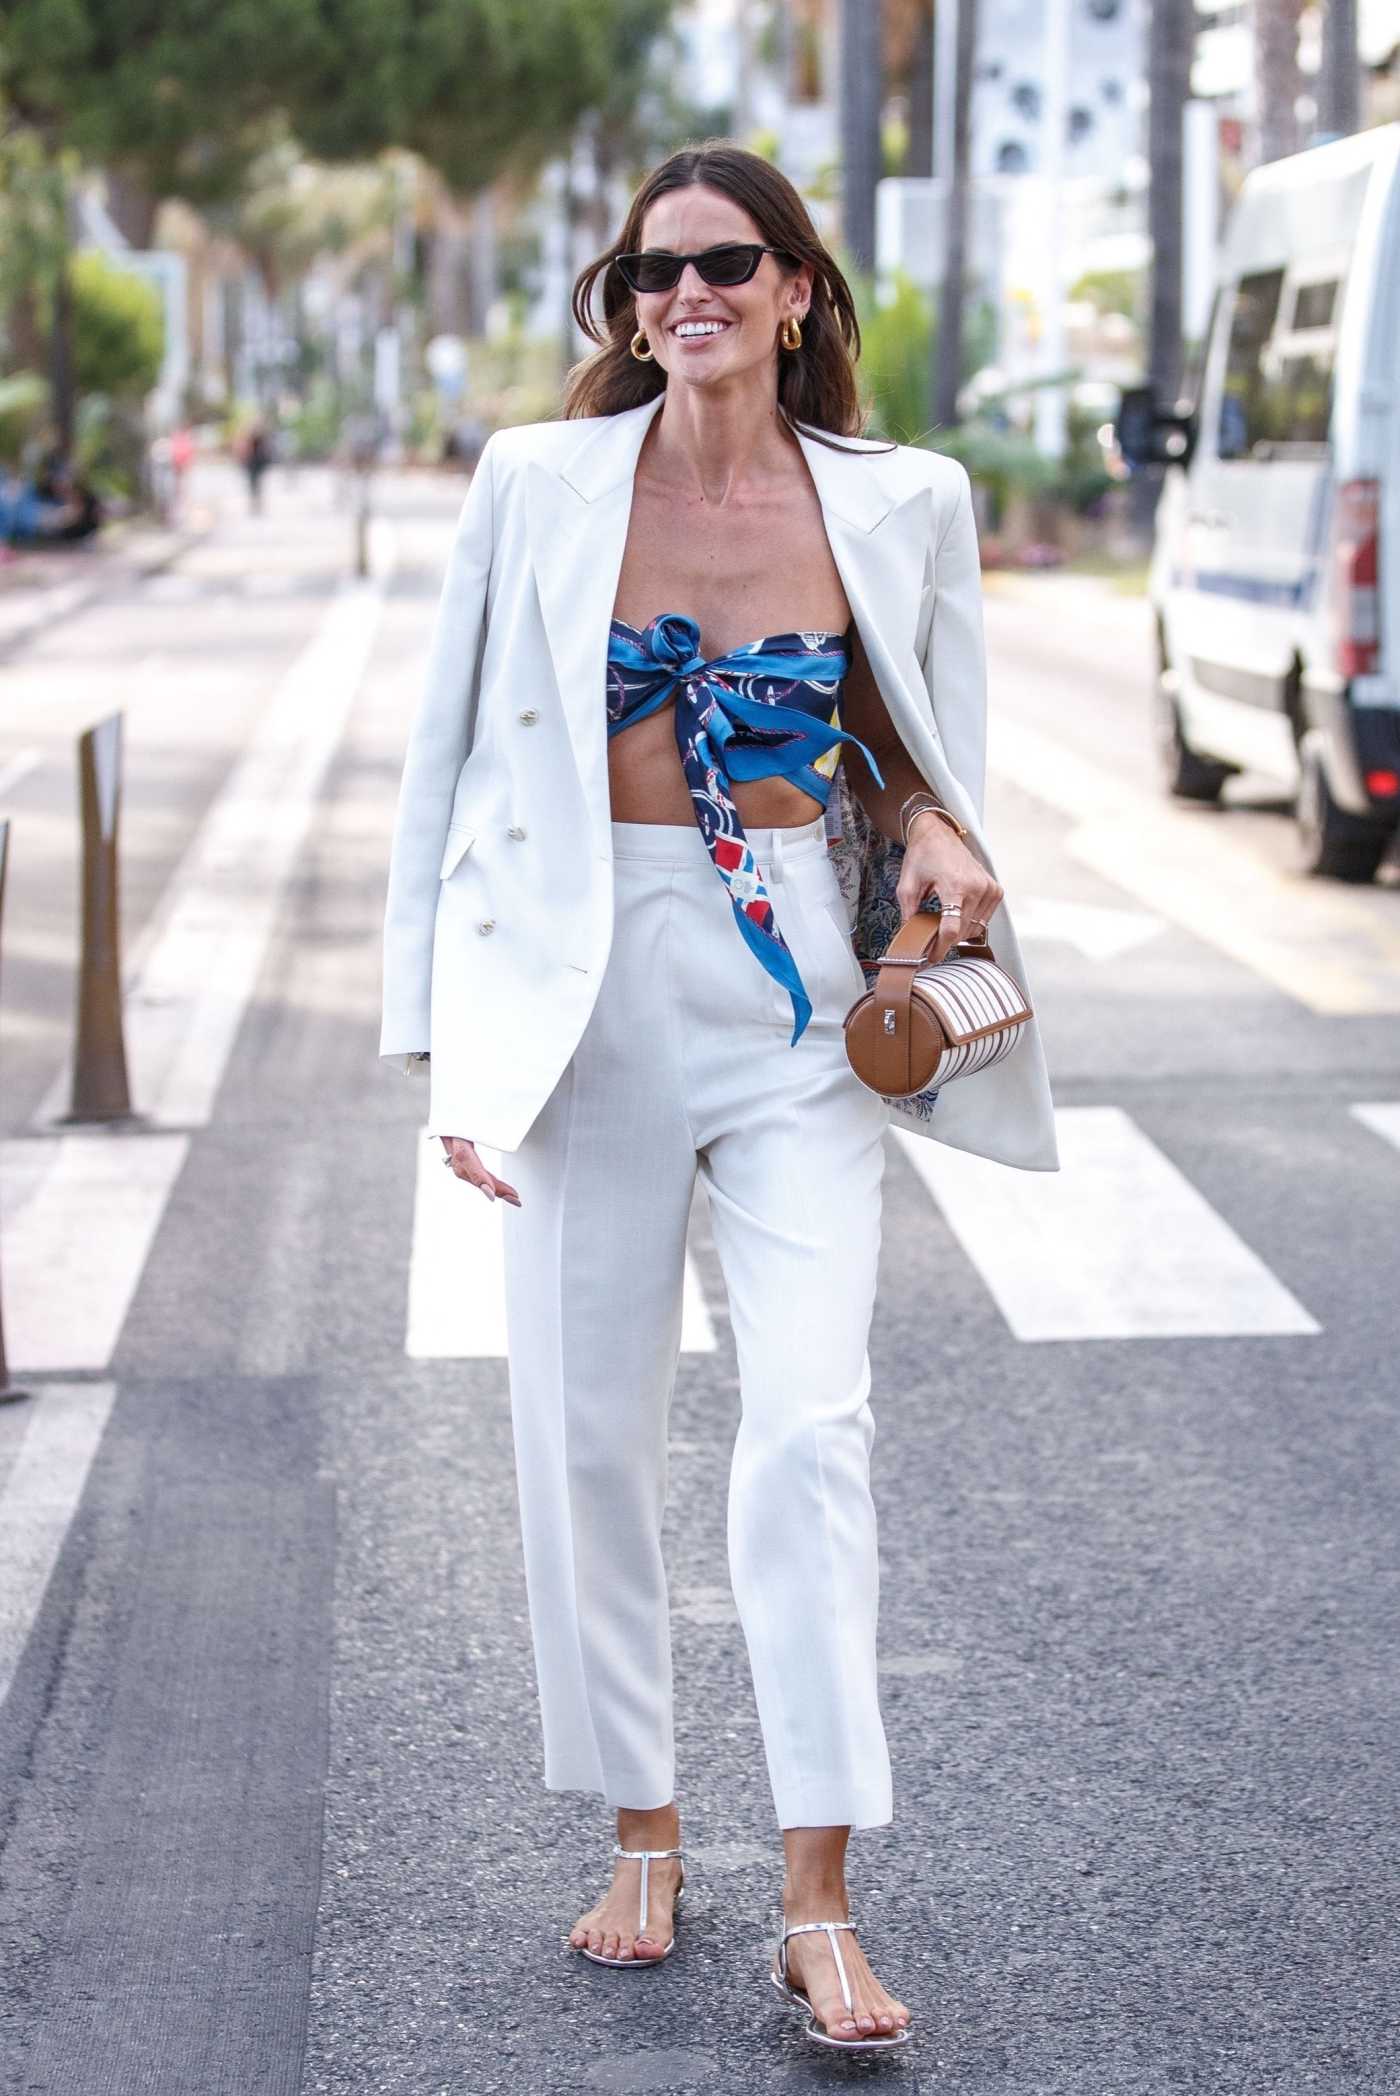 Izabel Goulart in a White Suit Was Seen Out in Cannes 07/06/2021